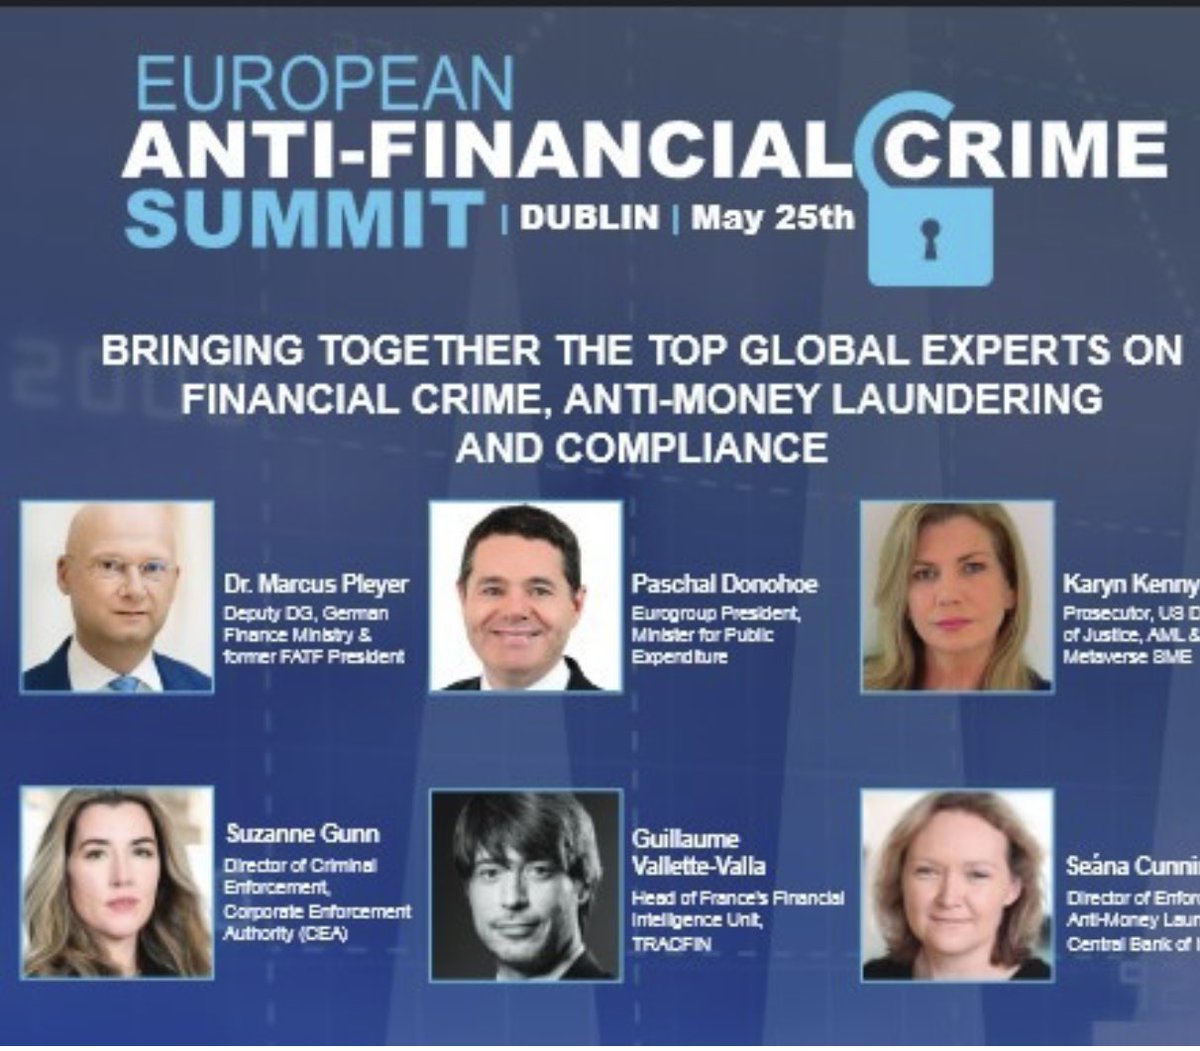 Really looking forward to speaking at the European Anti-Financial Crime Summit very soon and to getting together with friends and colleagues for exchanging on the newest trends.